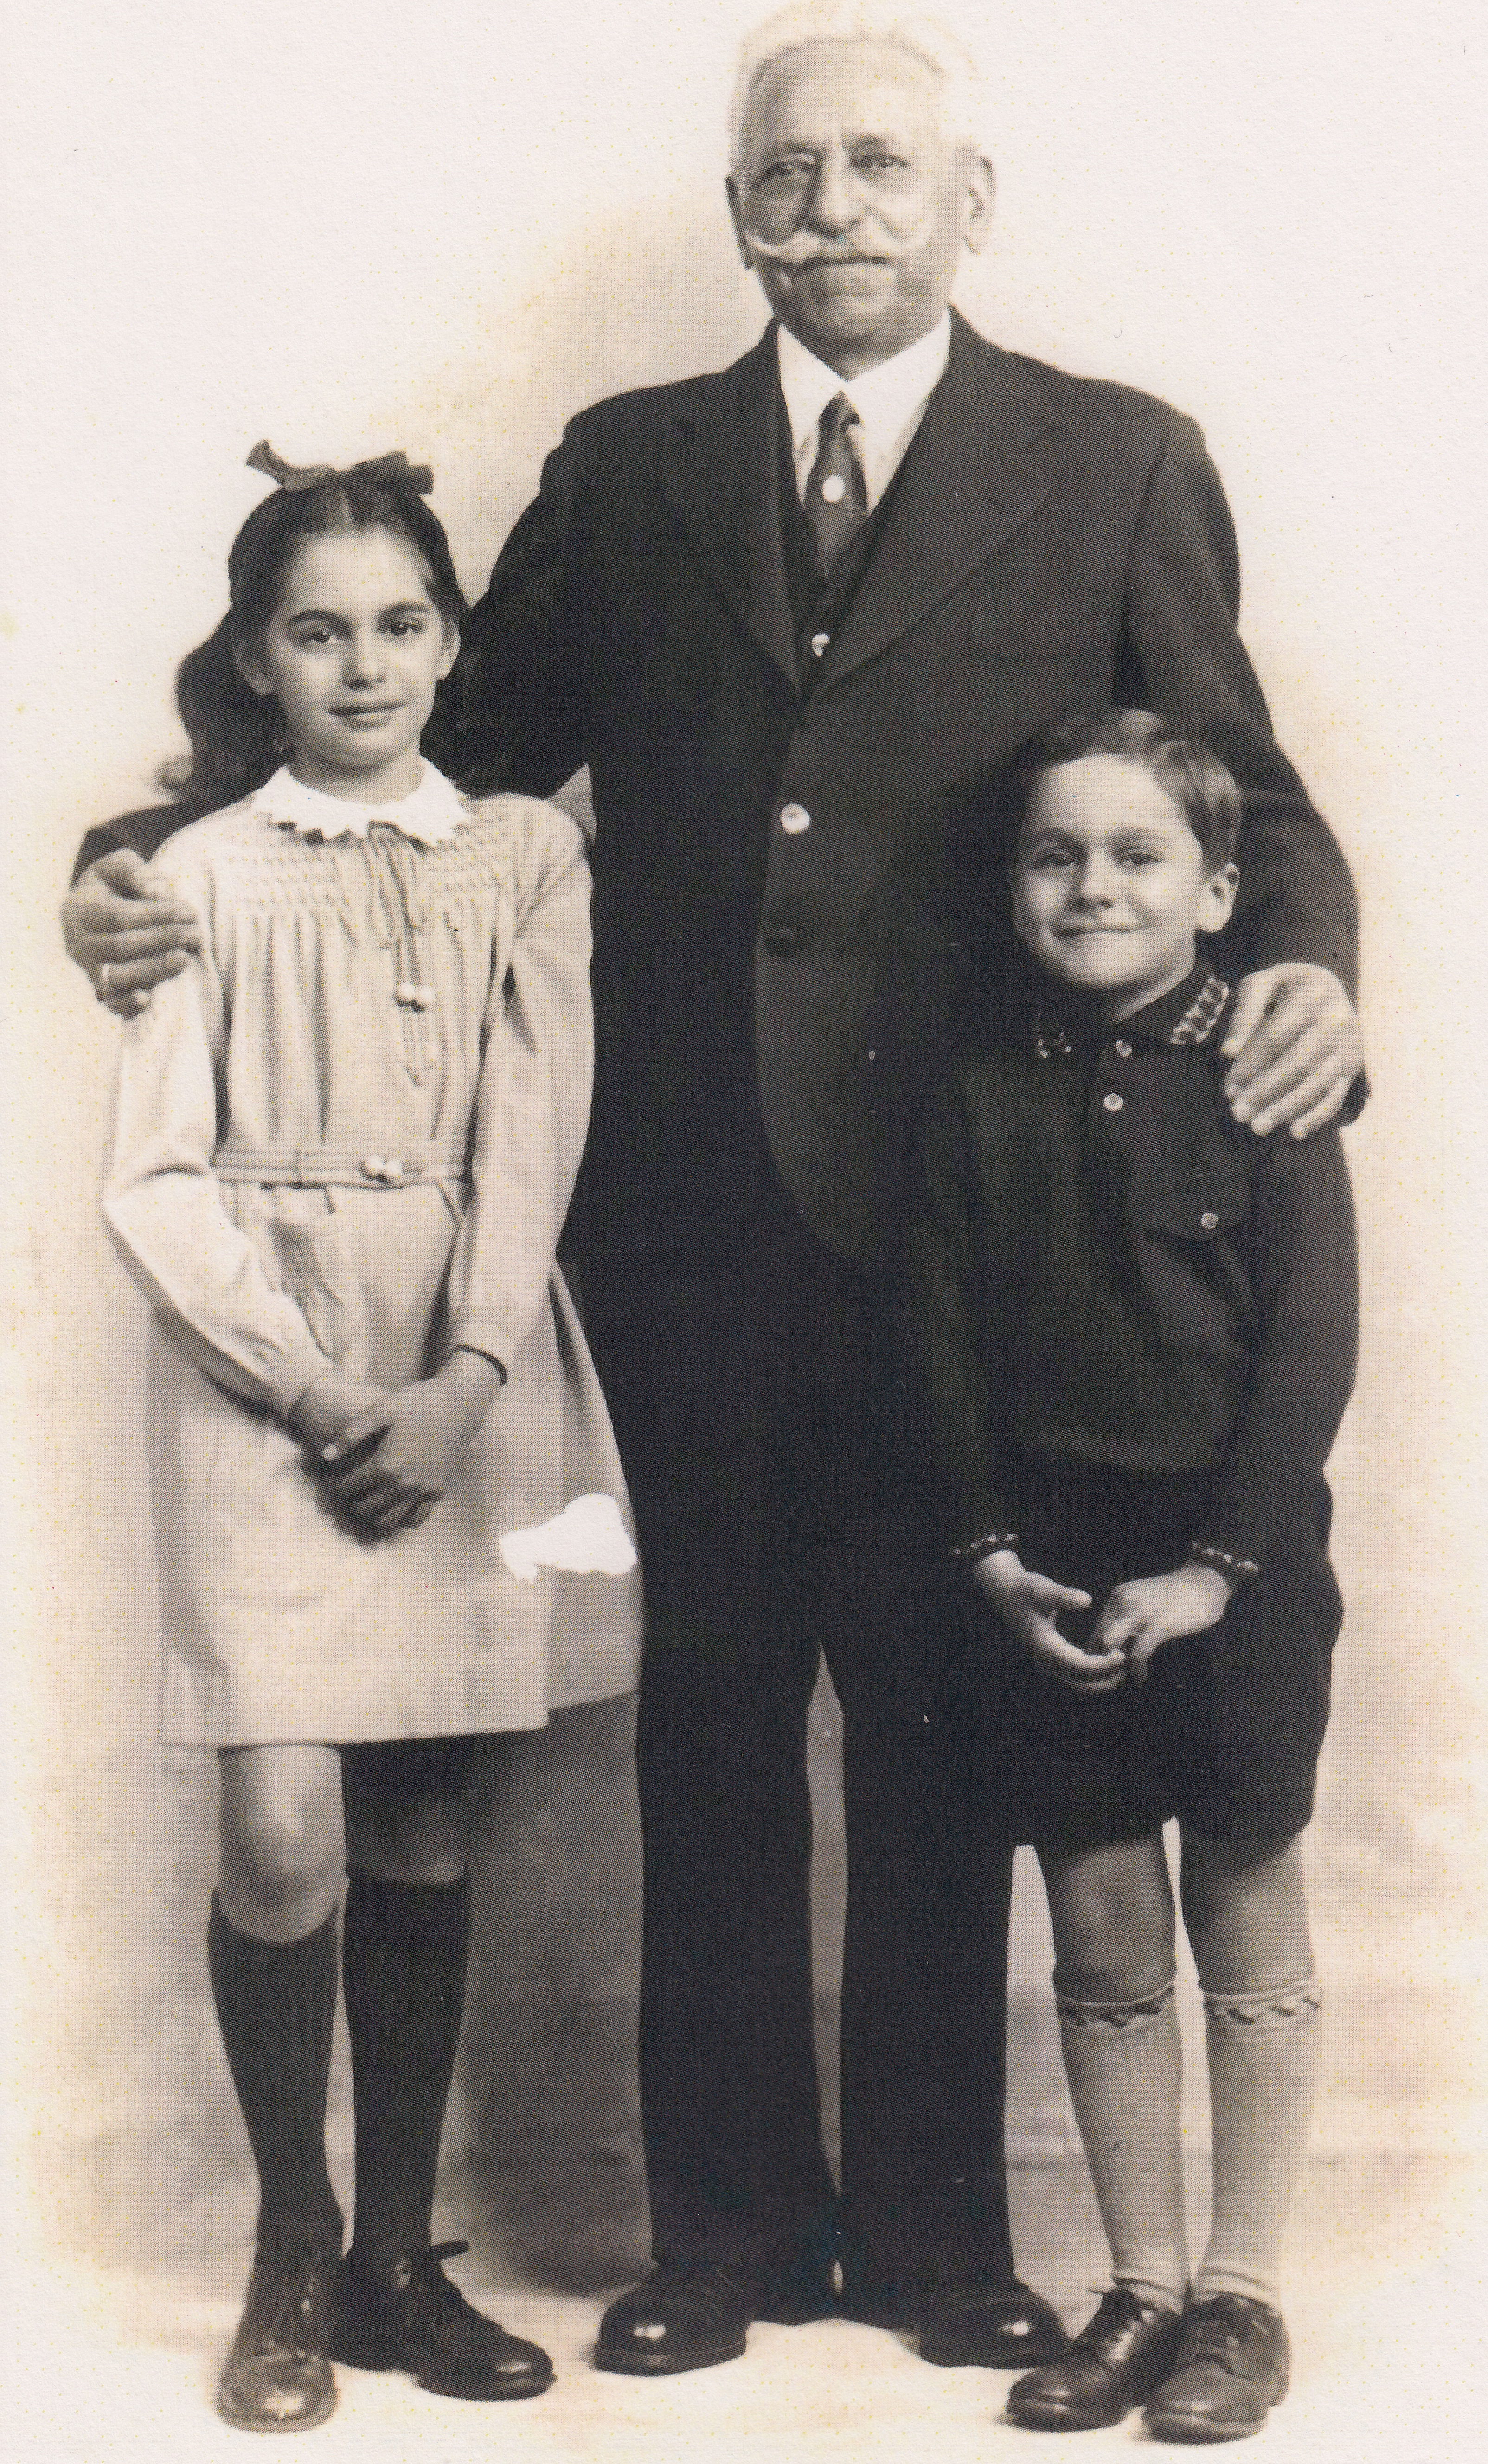 Grandfather Michael Bloch with Helga and Werner Gideon, New York, ca. 1942.